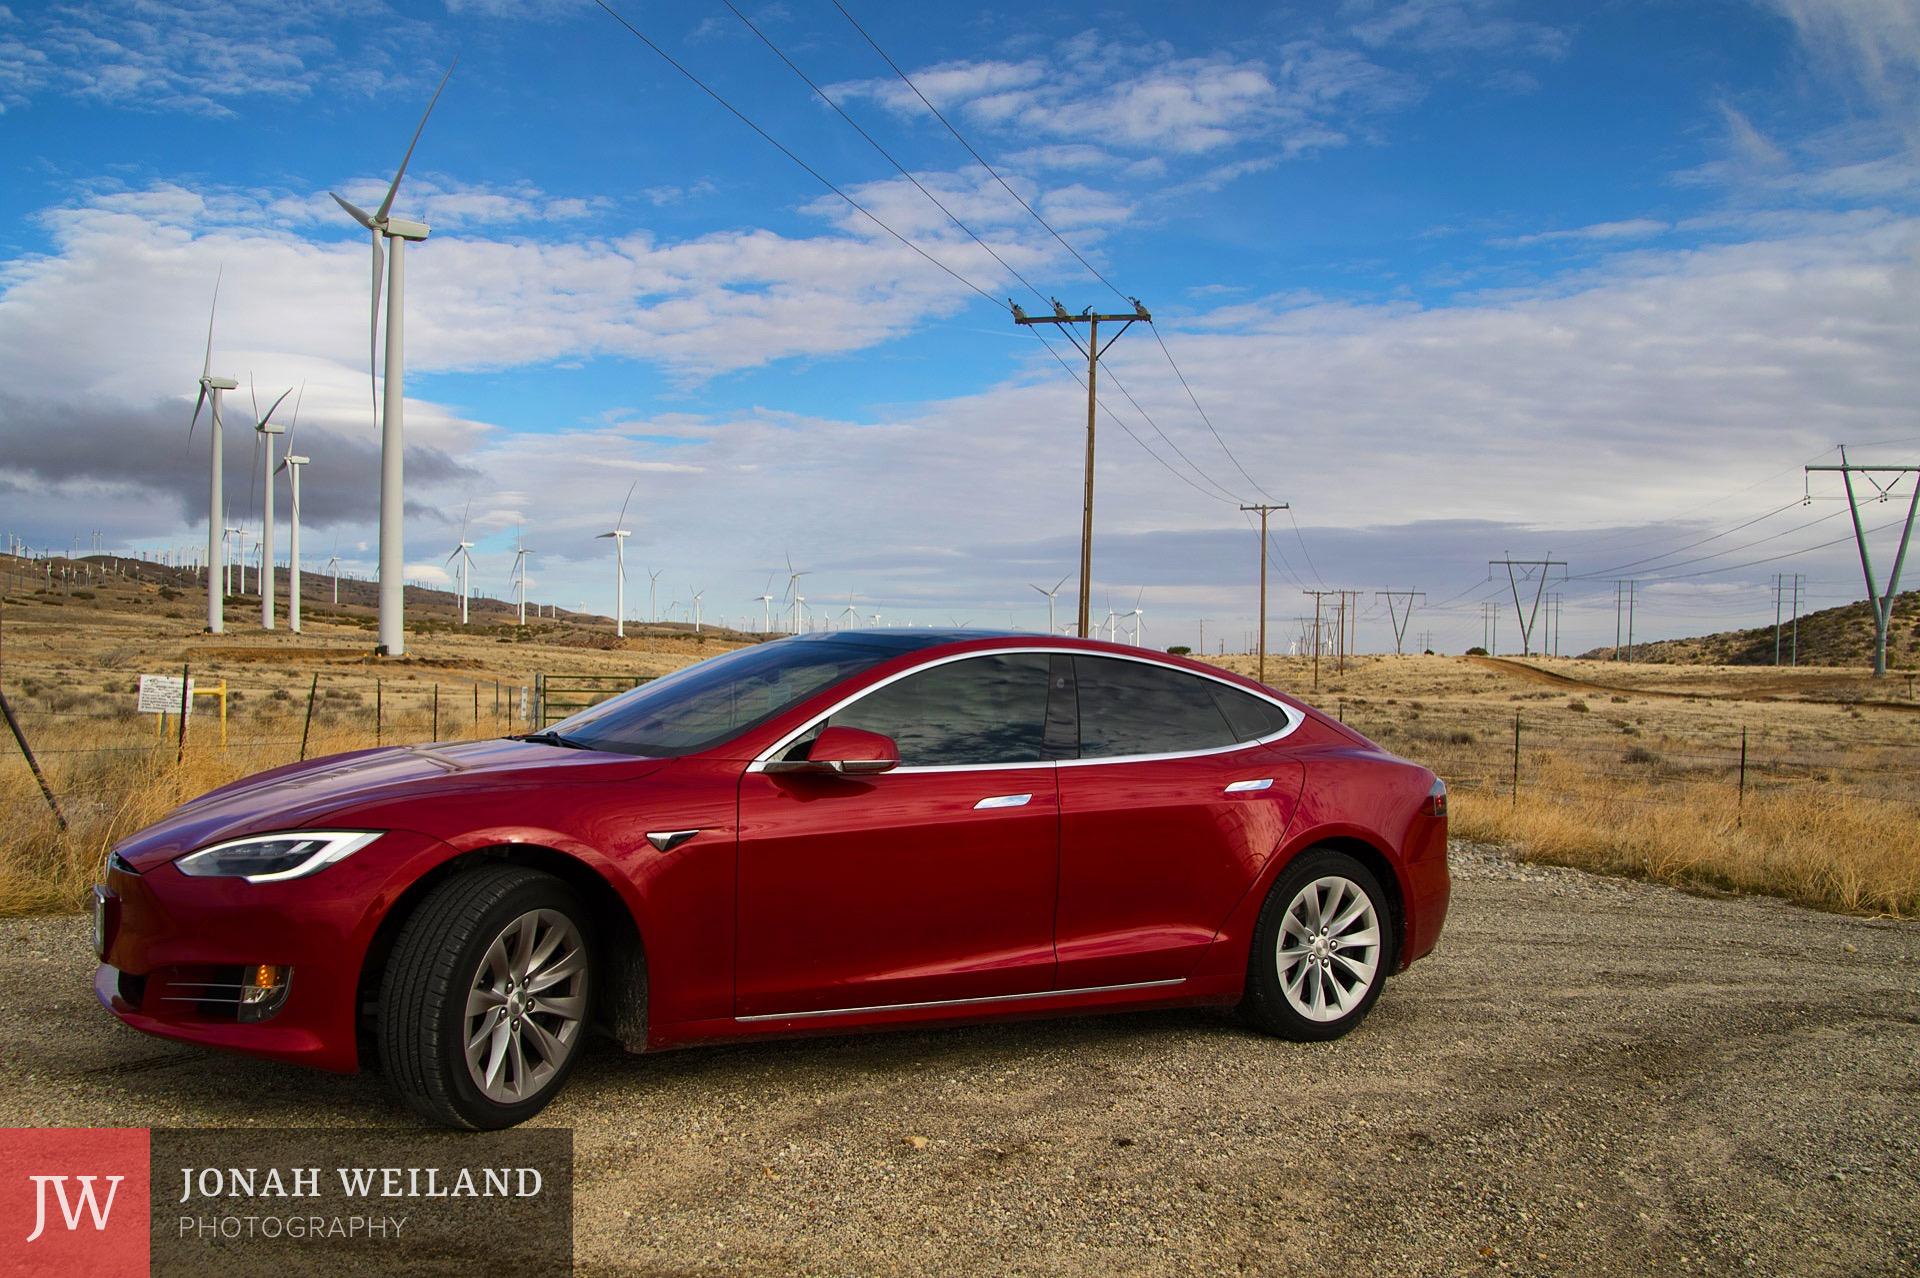 My Tesla Model S 75 at the Tehachapi Windfarm in Mojave, California. Taken with a Canon 7D Mark 2.